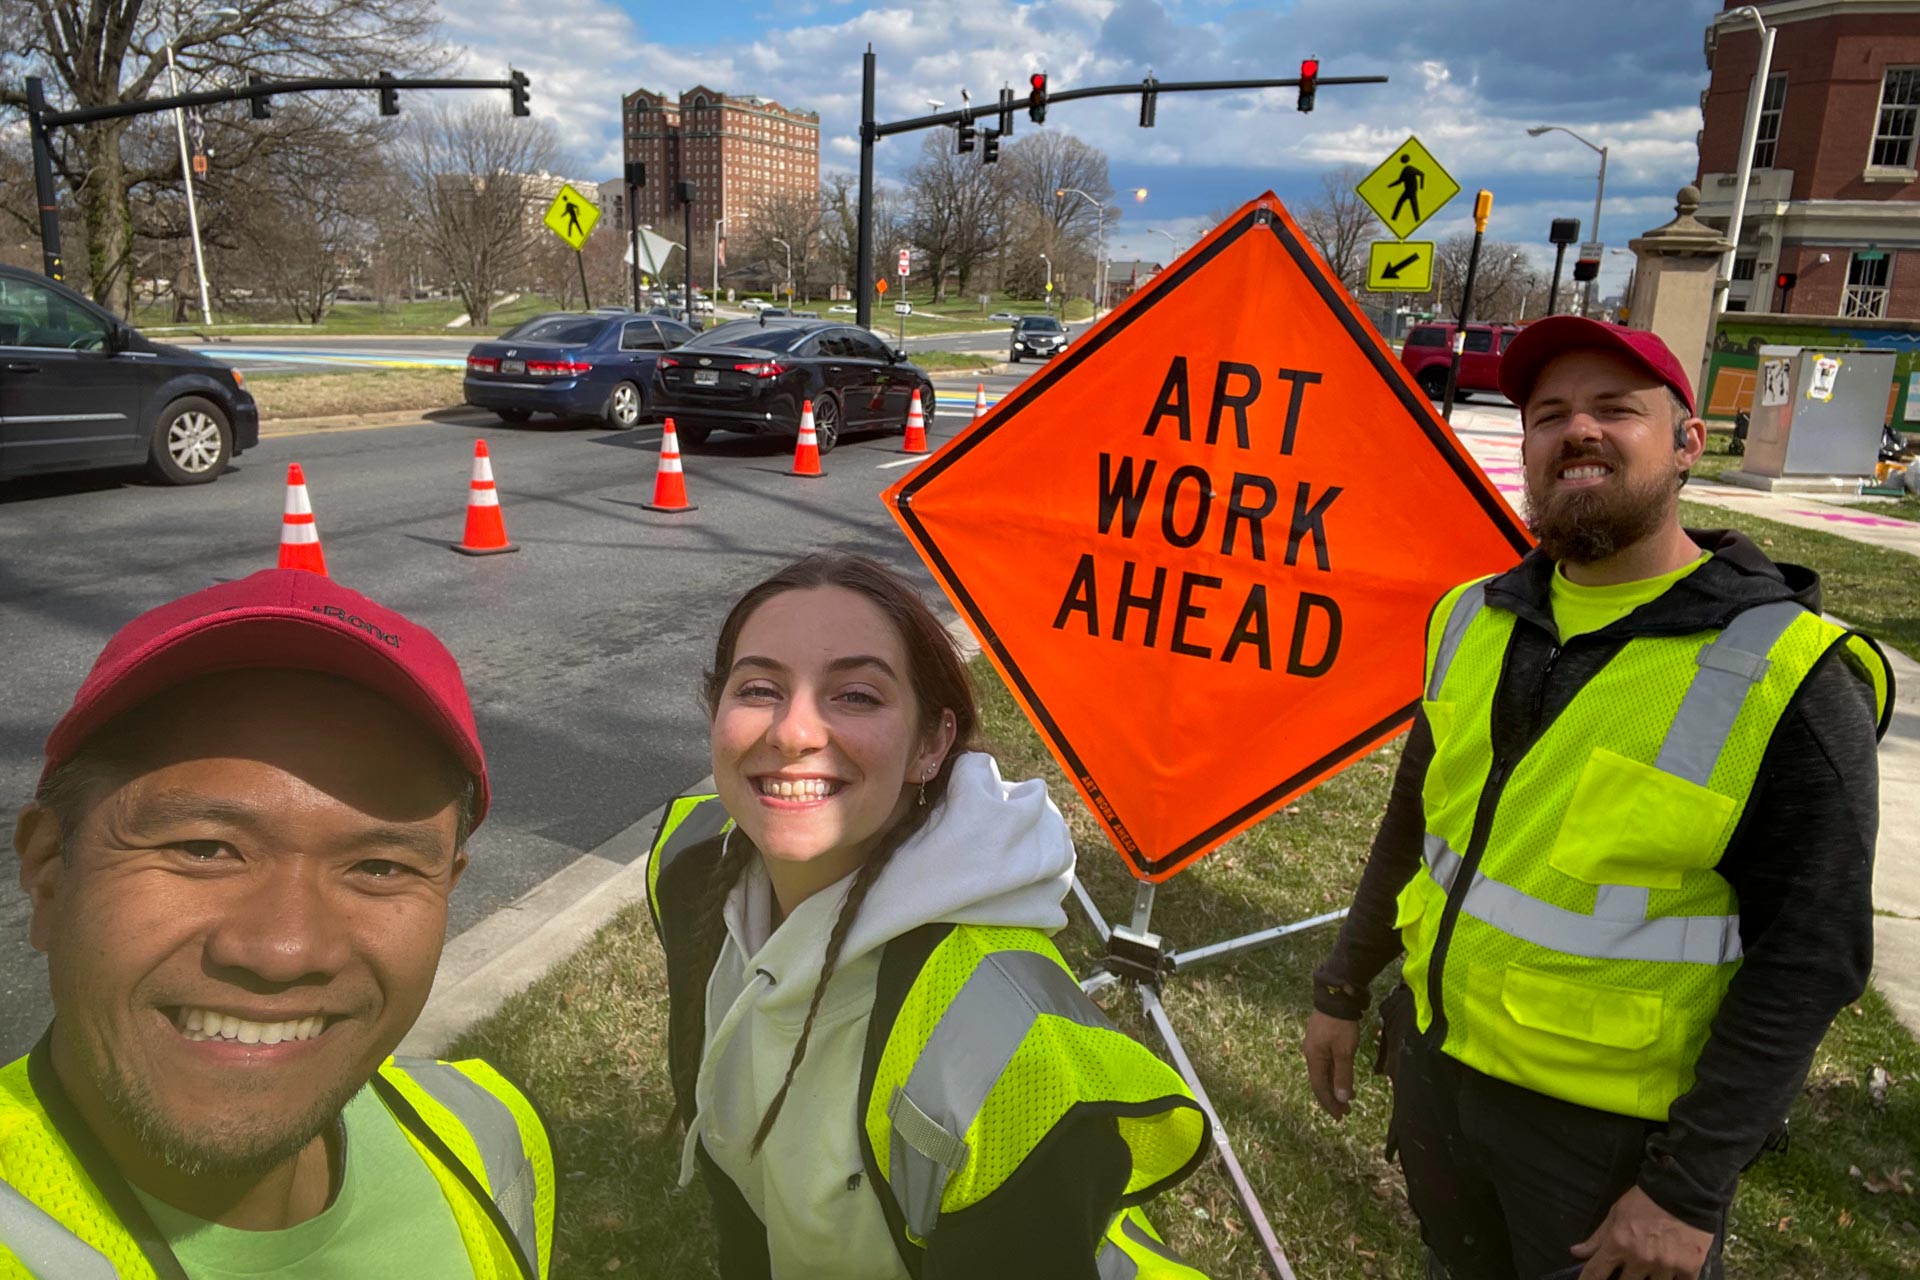 Druid Hill Canopy Crosswalk Graham Projects install team selfie with Kylee, Graham, and Melvin in front of a large ART WORK AHEAD sign